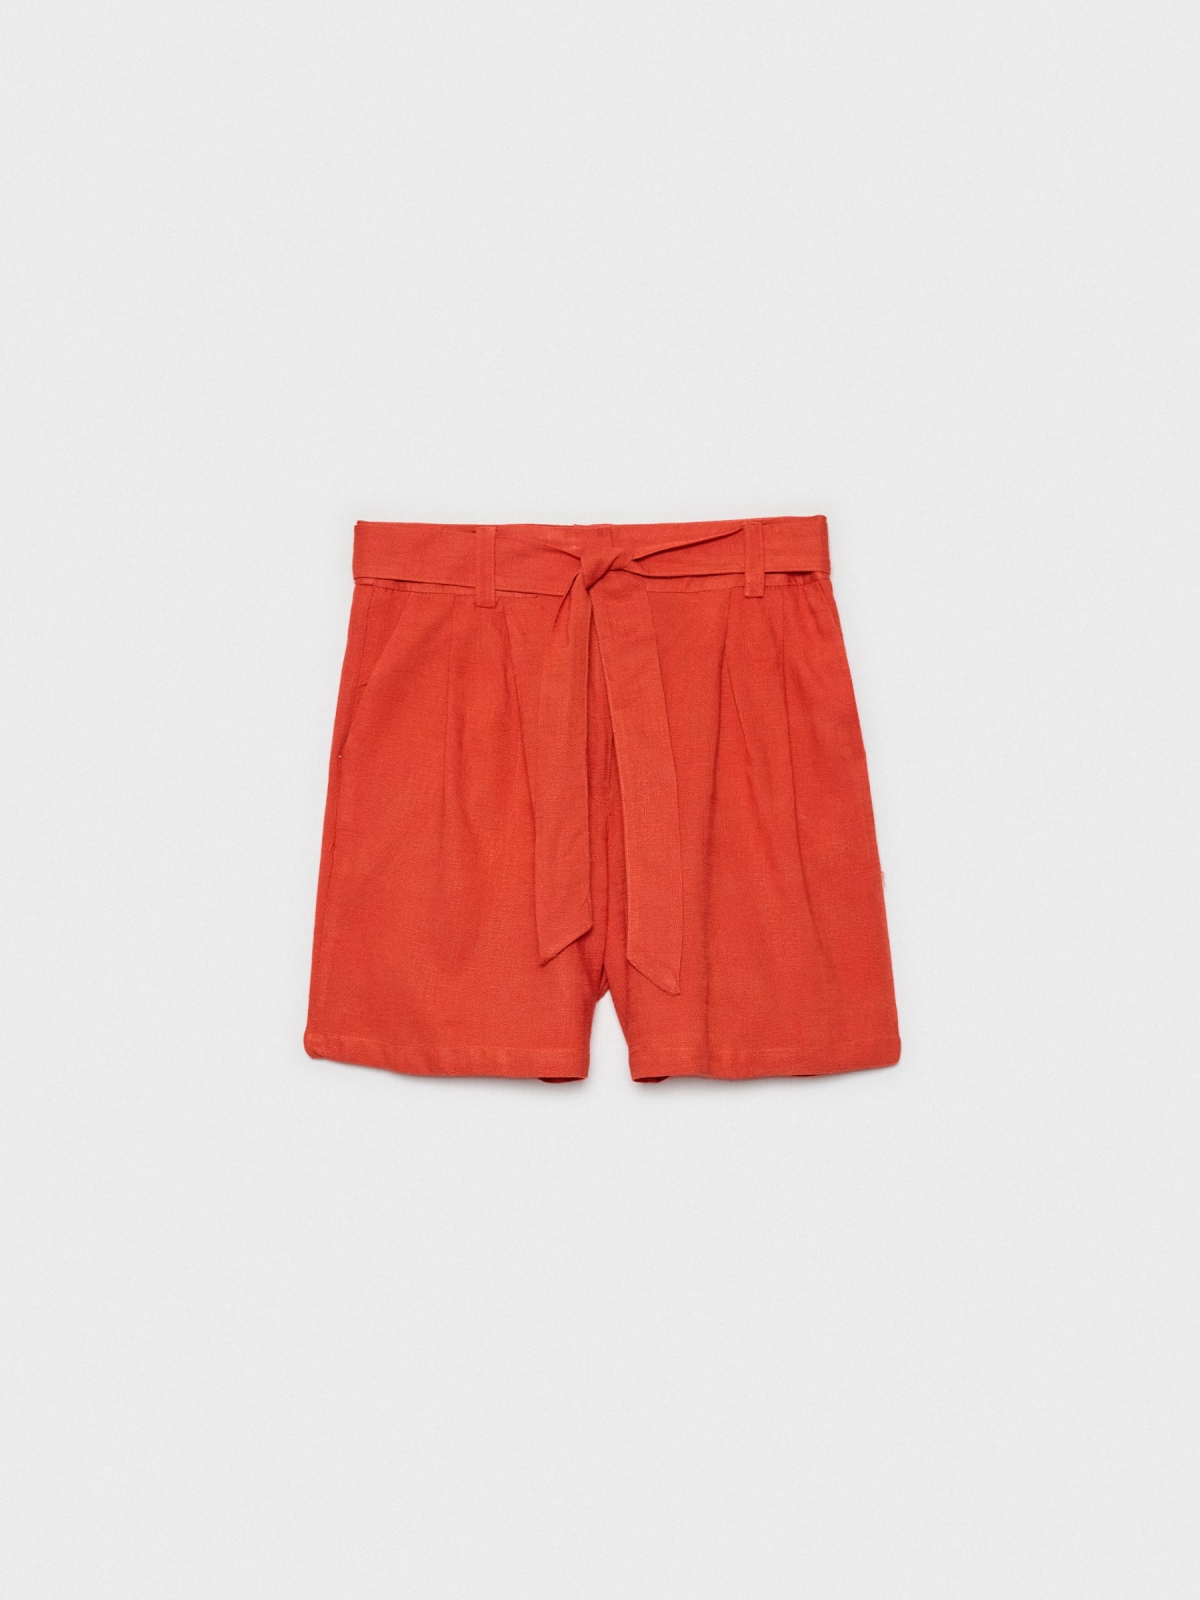  Rustic clamp shorts brick red